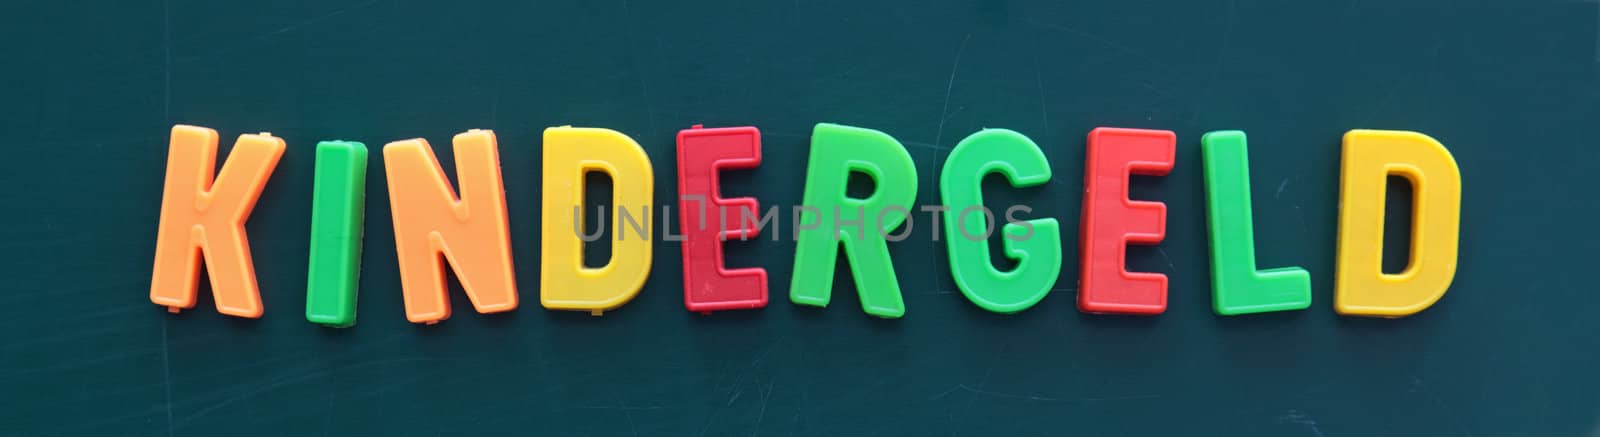 The german term for child allowance in colorful letters on a blackboard.